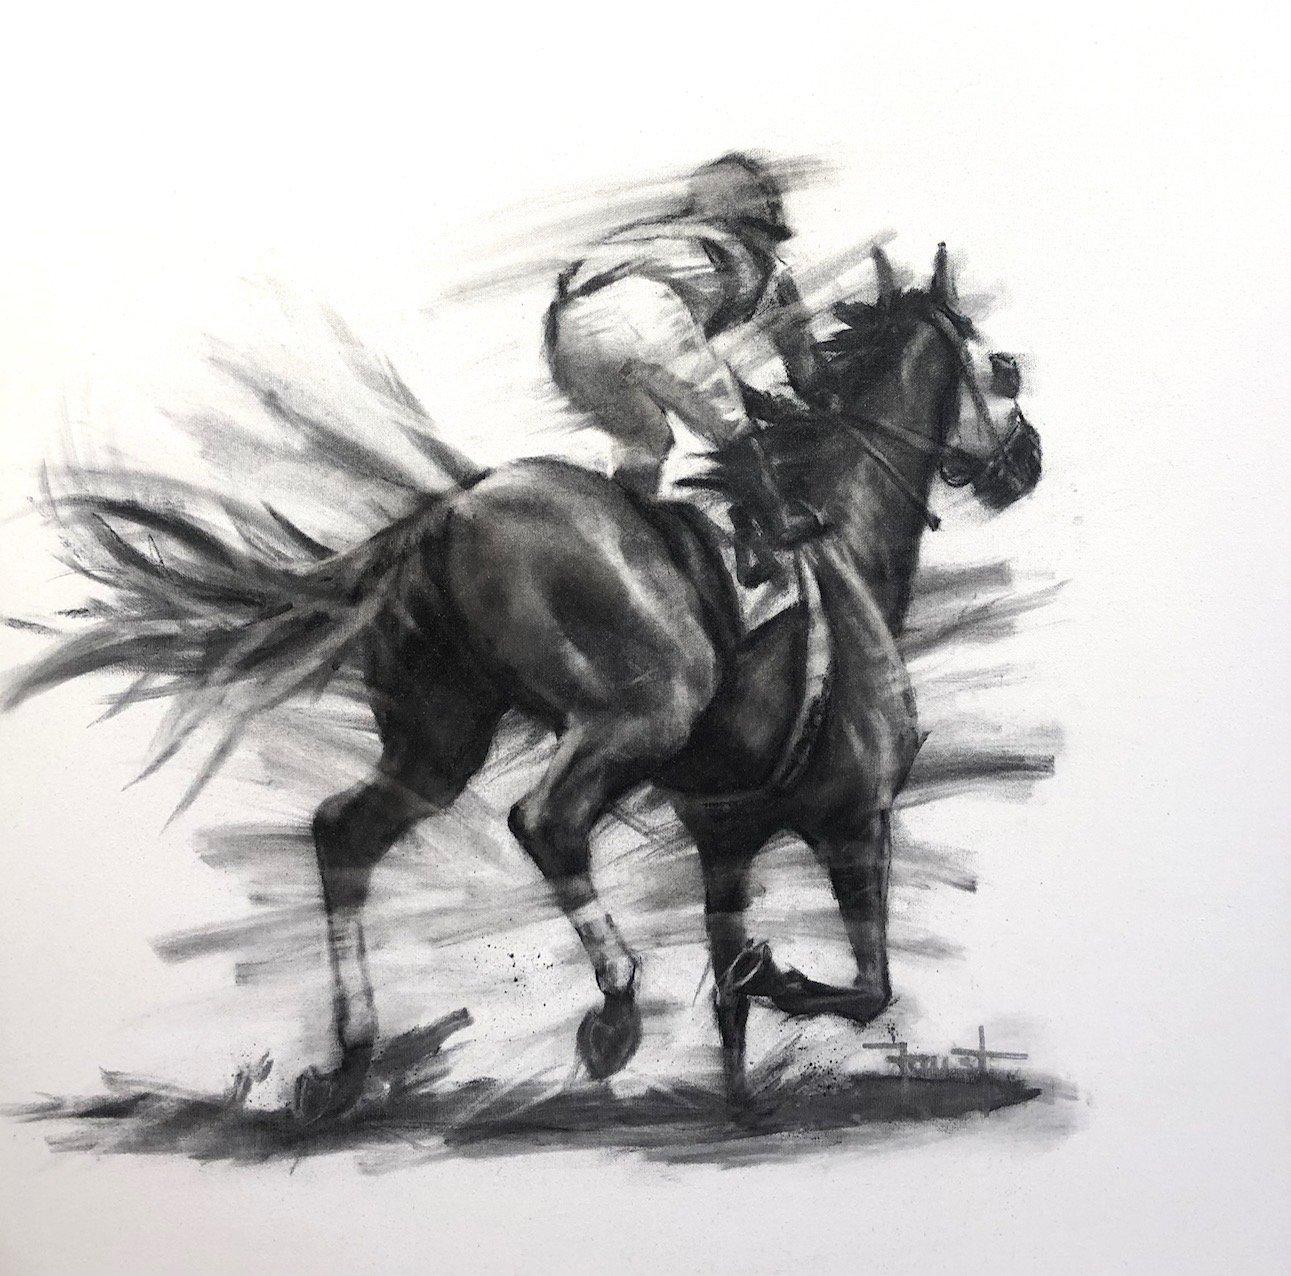 This equine drawing, "Chasing the Lead" is a 30x30" black and white charcoal paintings on canvas by artist Shawn Faust depicting a horse and jockey heading towards the big race. Complimentary to Faust's traditional oil works, these charcoal on